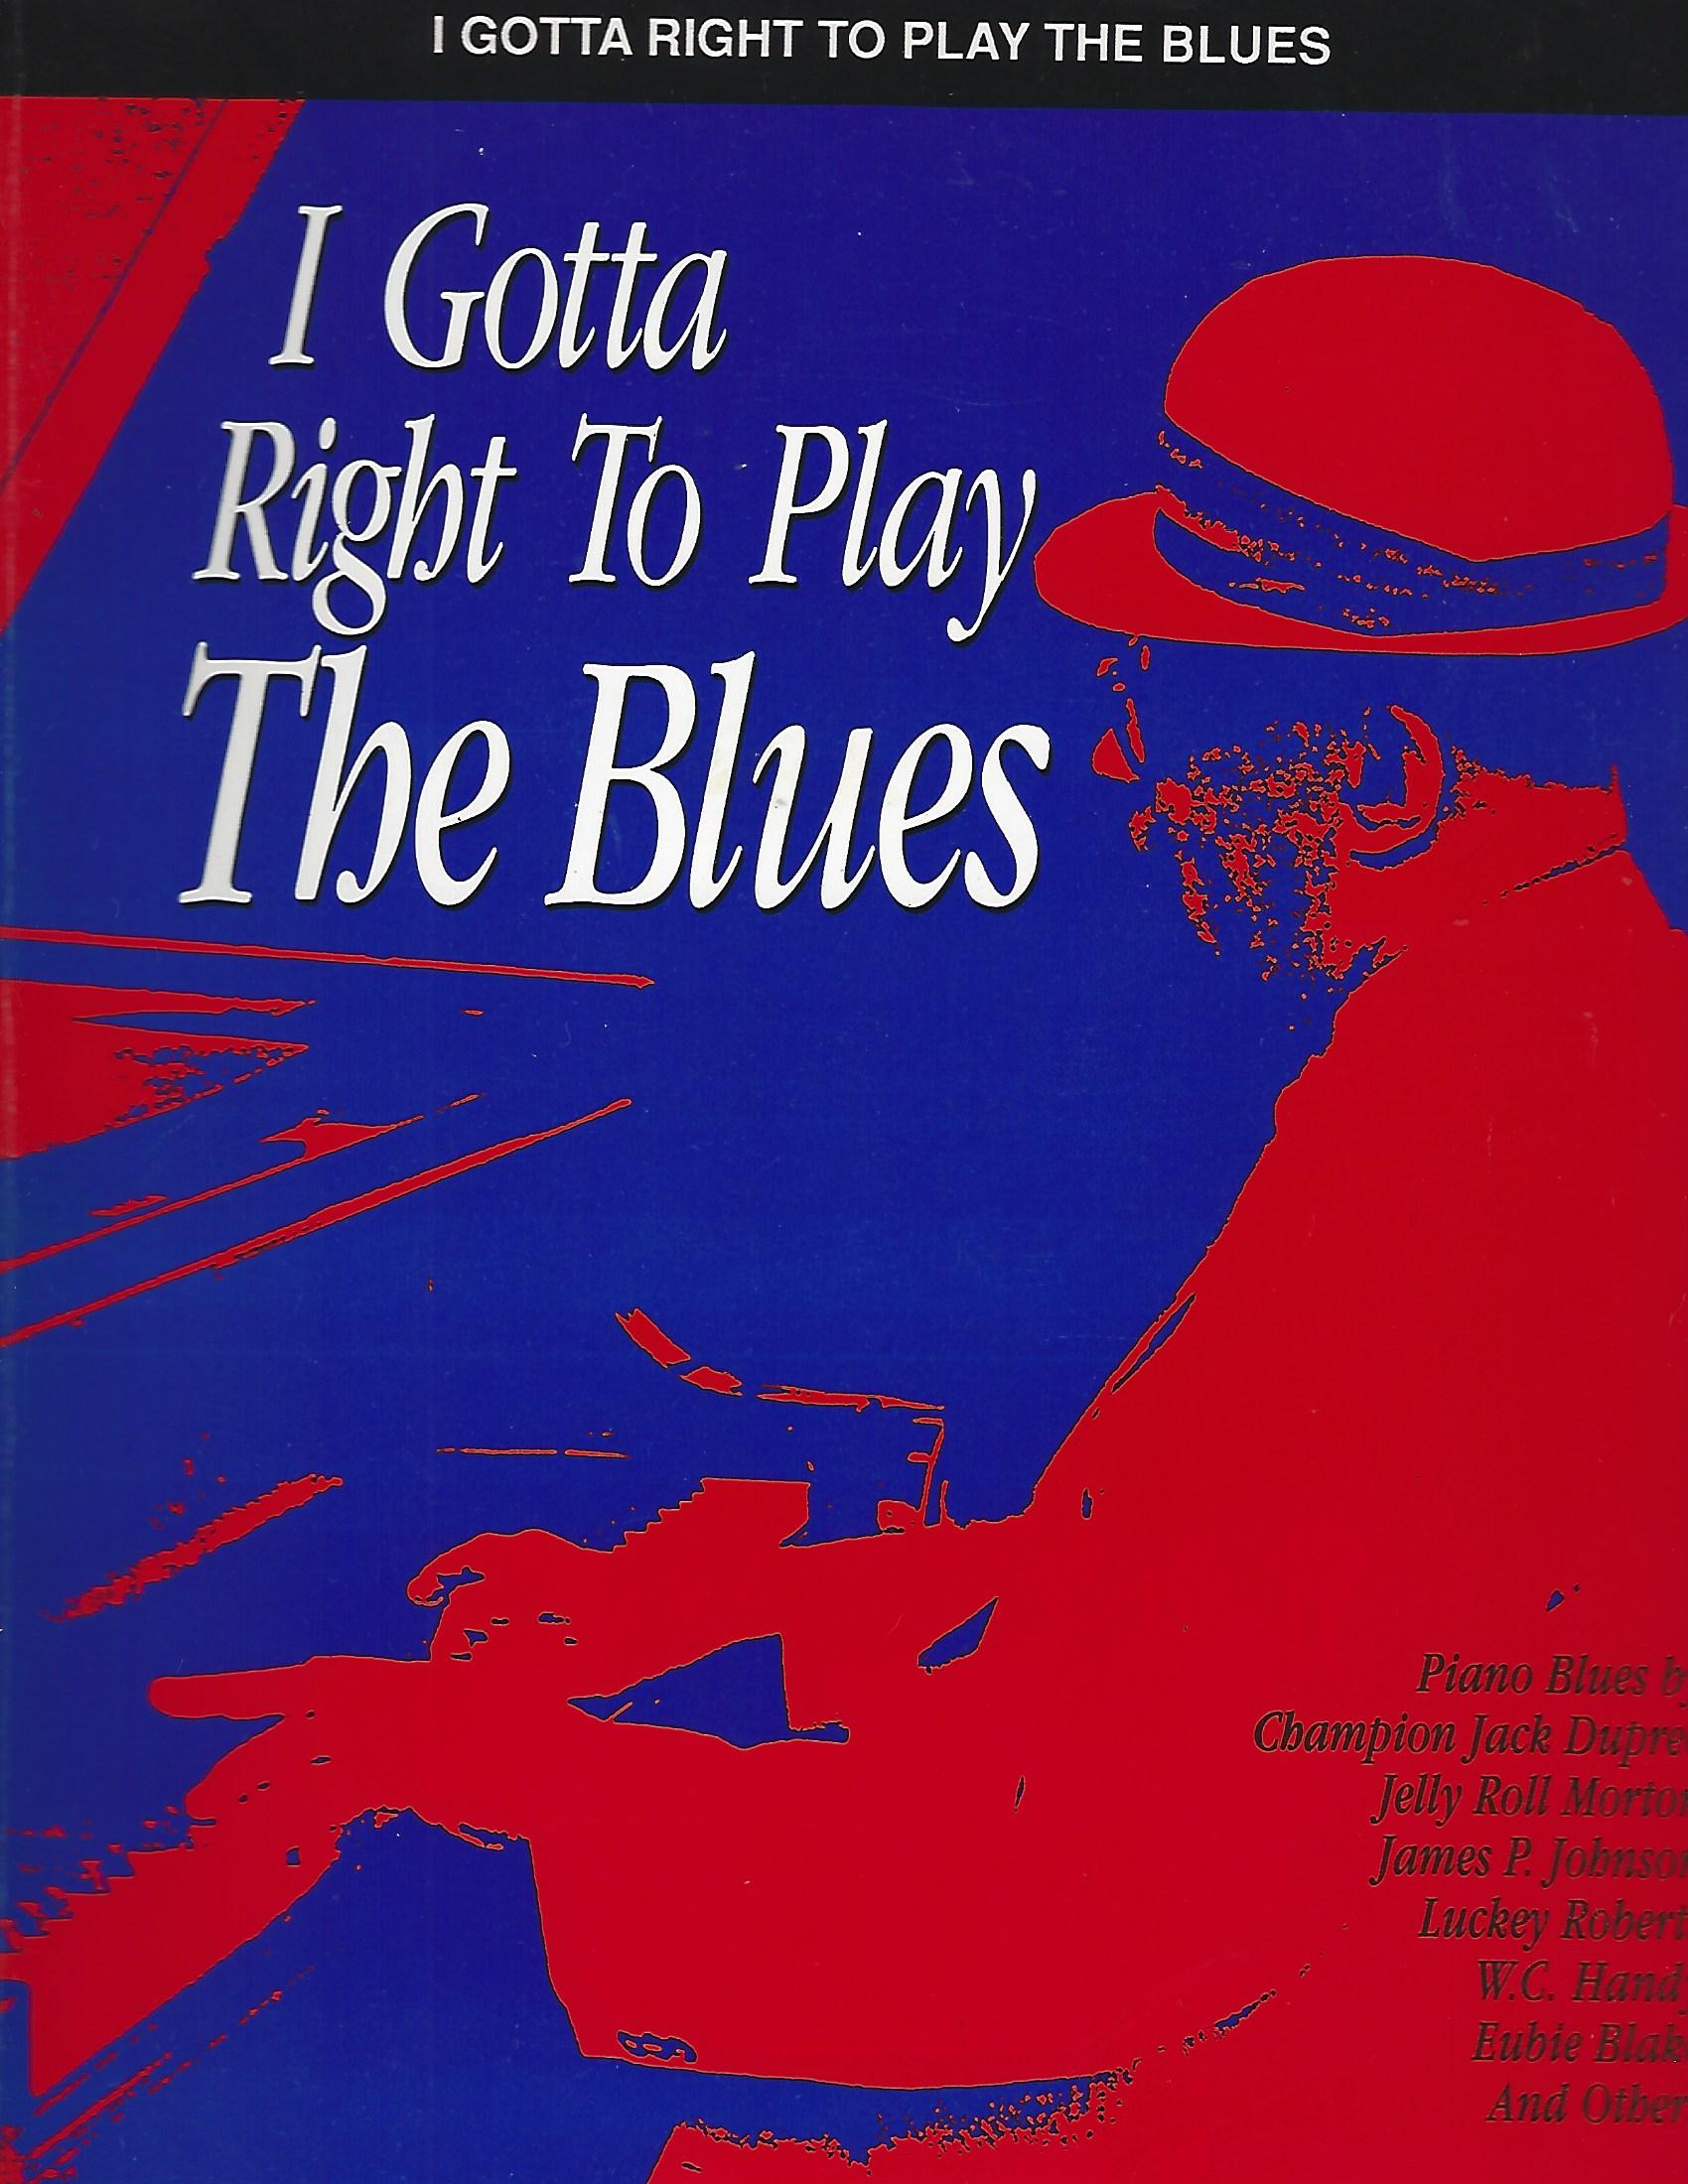 Play　(1991)　to　Book　cover　Blues:　Gotta　the　Good　Eve's　Garden　Very　Right　I　Soft